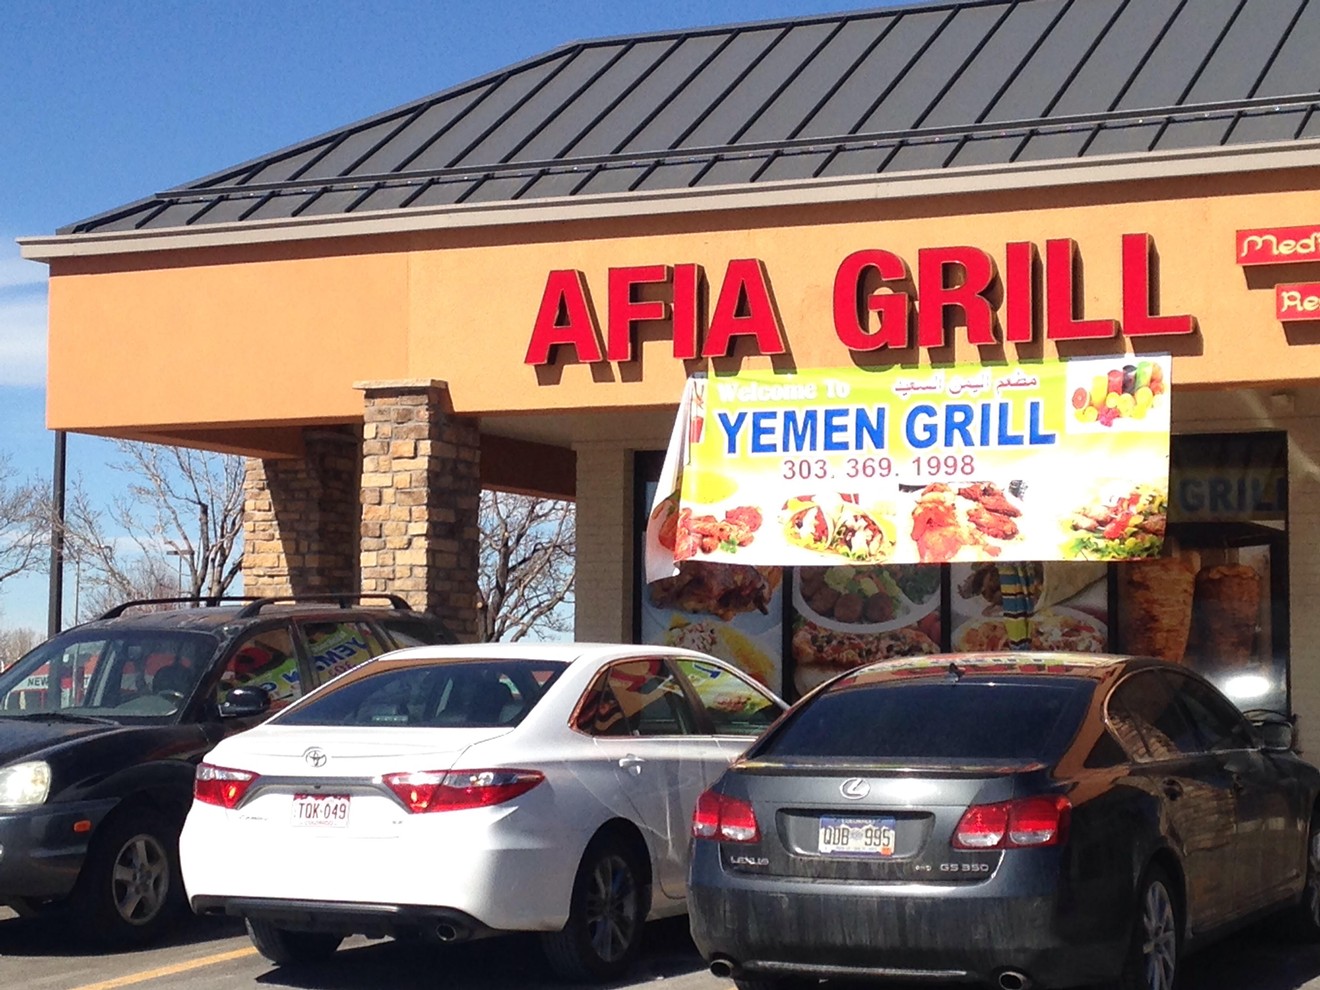 Afia Grill changed hands and is now Yemen Grill.